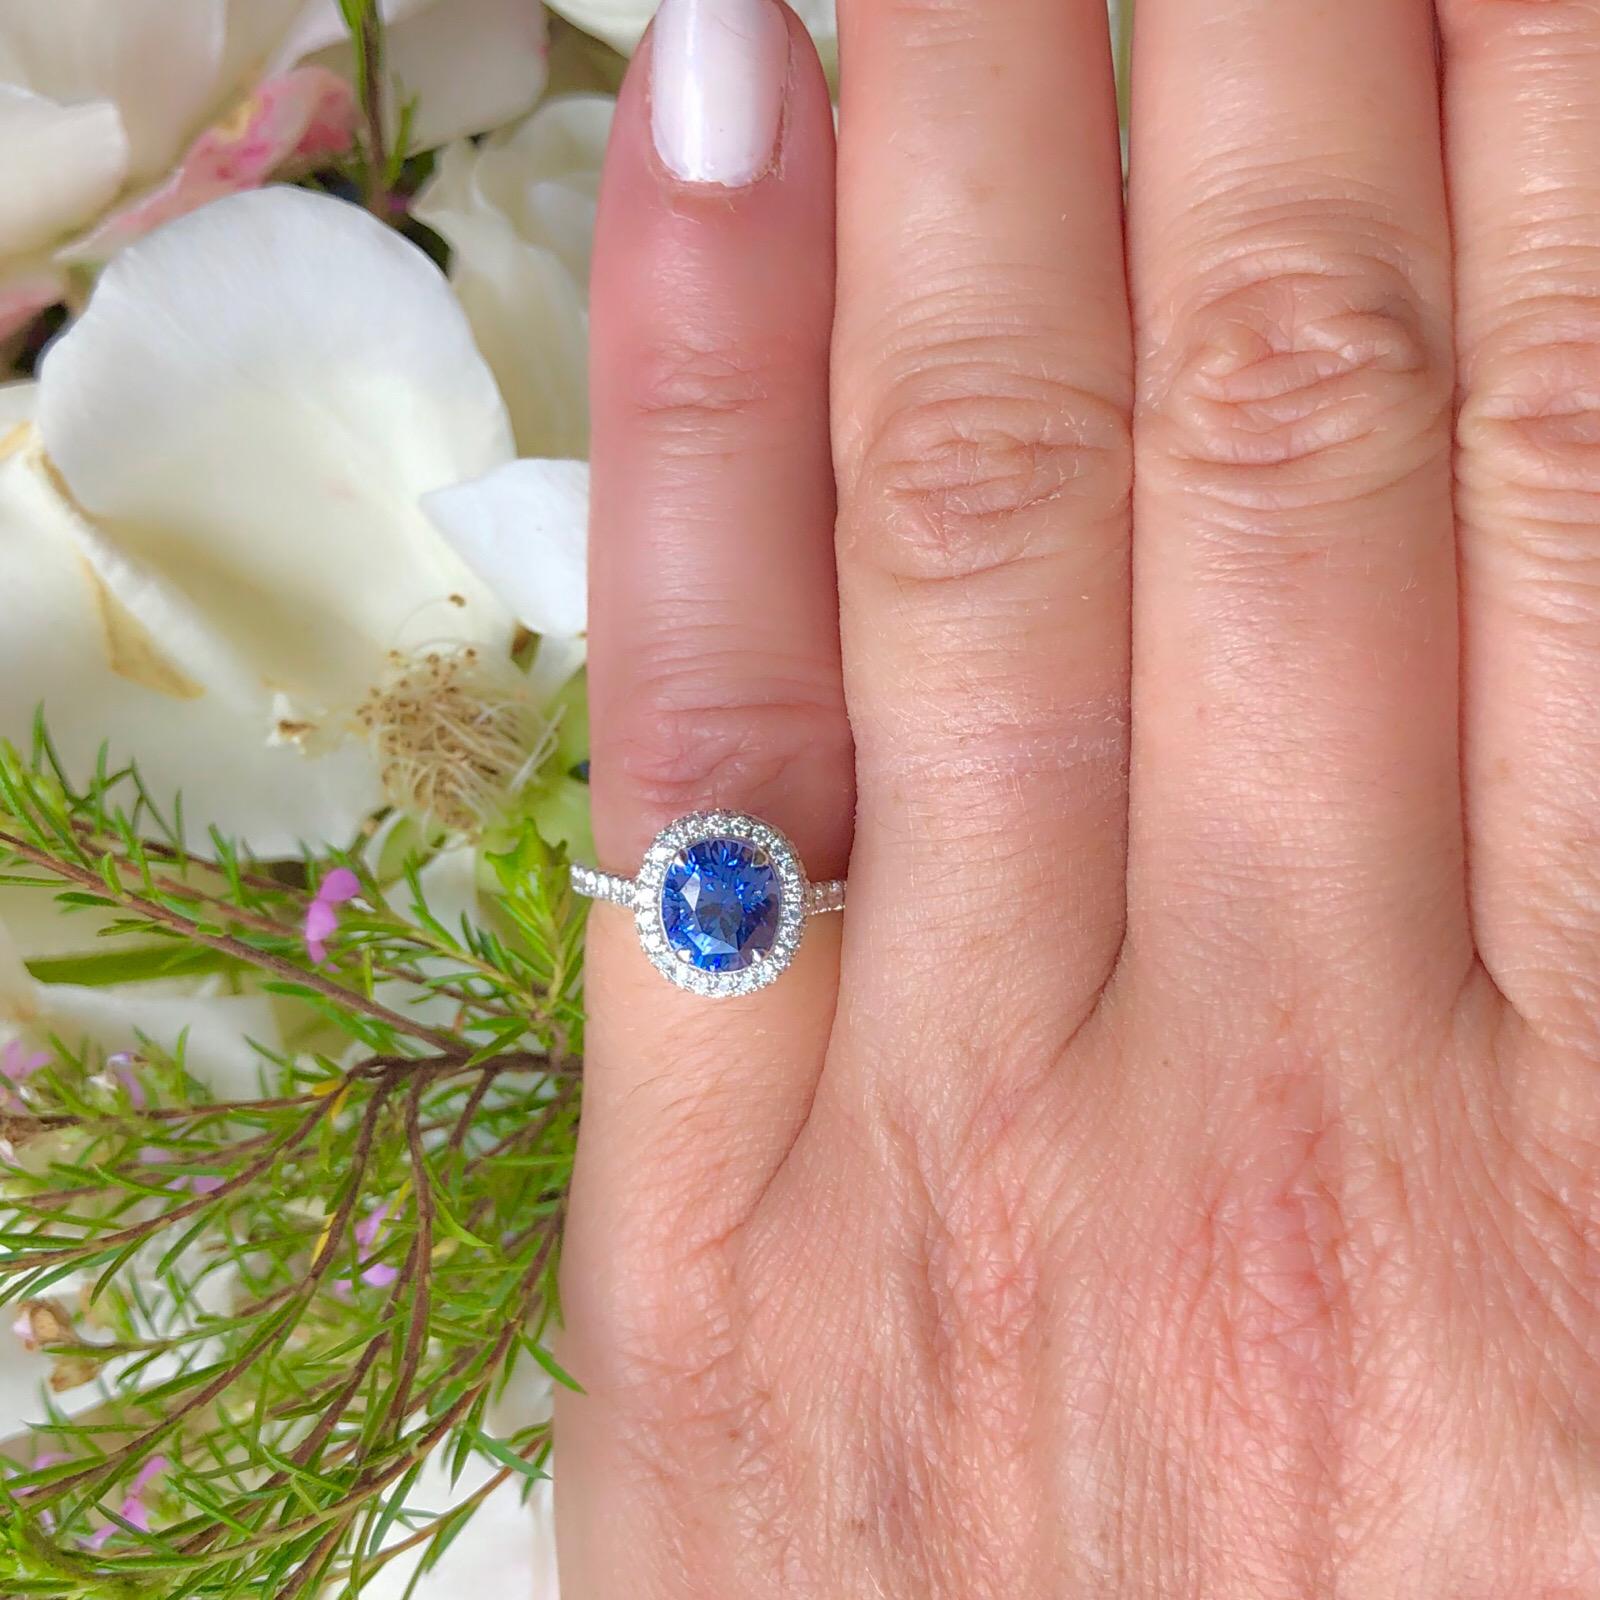 This beautiful 18k white gold, no-heat sapphire ring will charm with it's subtle color change from violet to blue! Well saturated with full, rich color, the 2.36-cts. oval sapphire is set within a halo and micro-set shoulders of 72 round